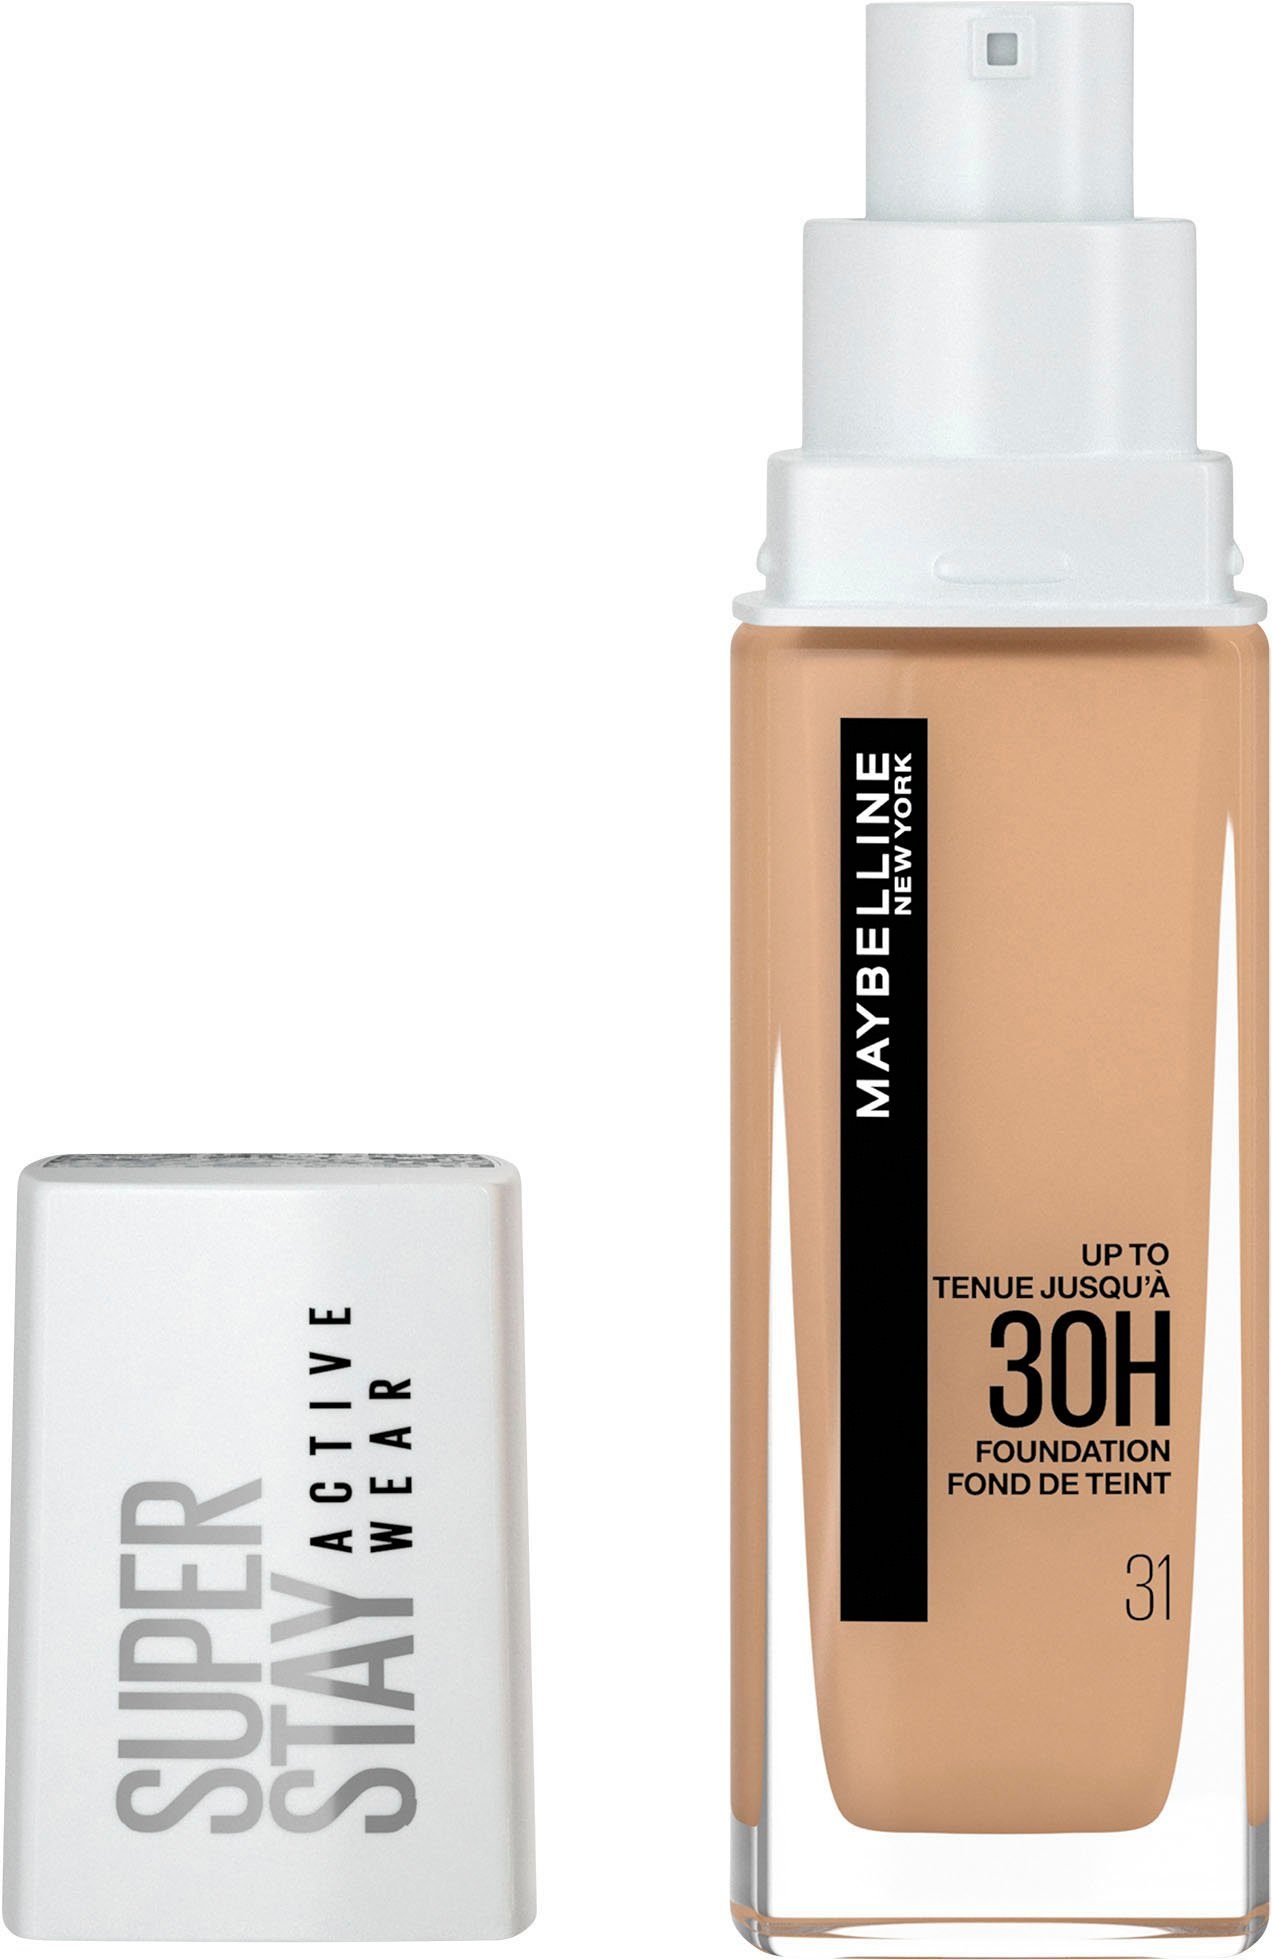 MAYBELLINE NEW YORK Foundation Nude 31 Warm Wear Active Stay Super